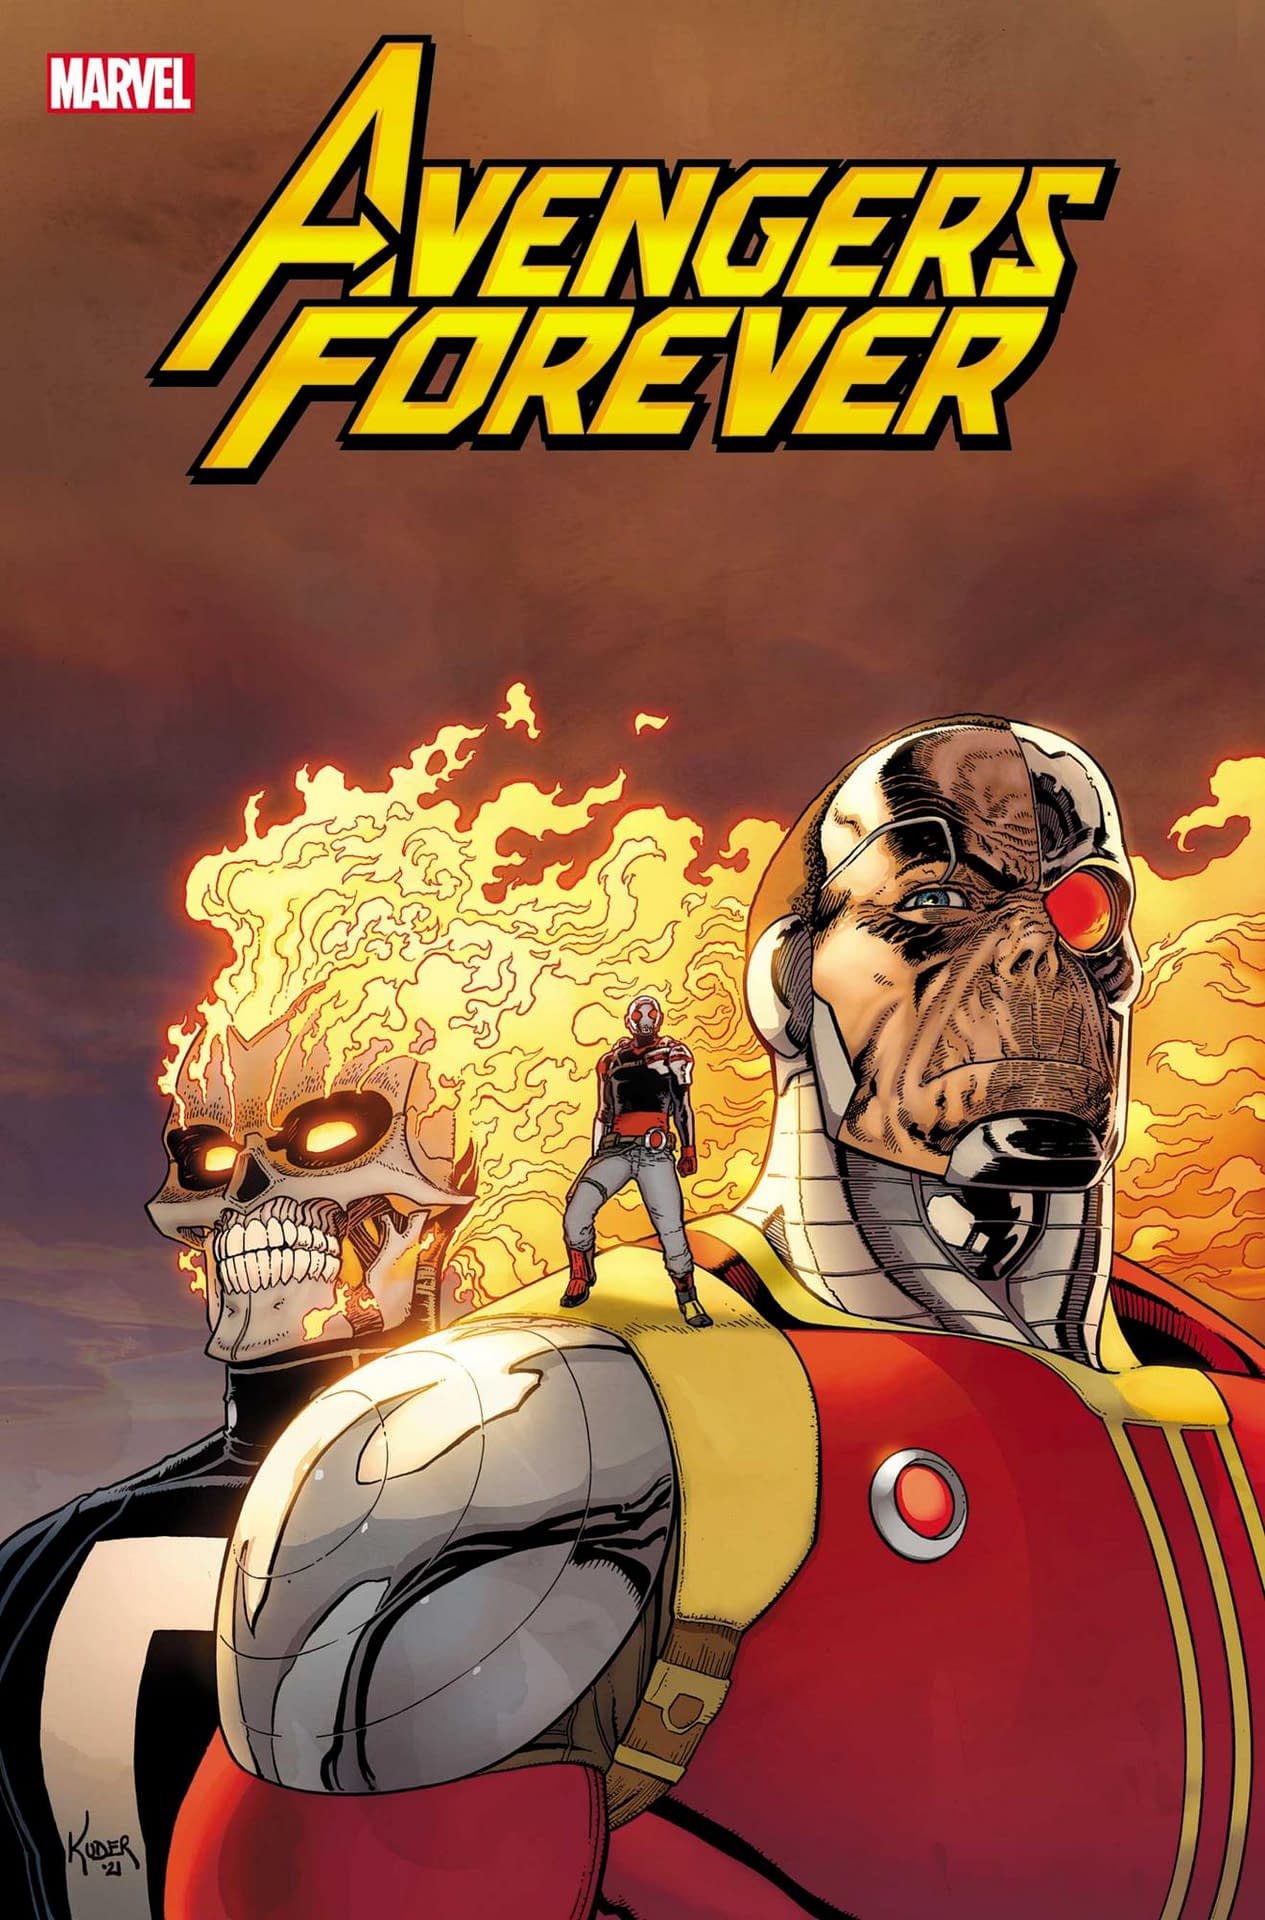 Cover image for AVENGERS FOREVER #3 AARON KUDER COVER